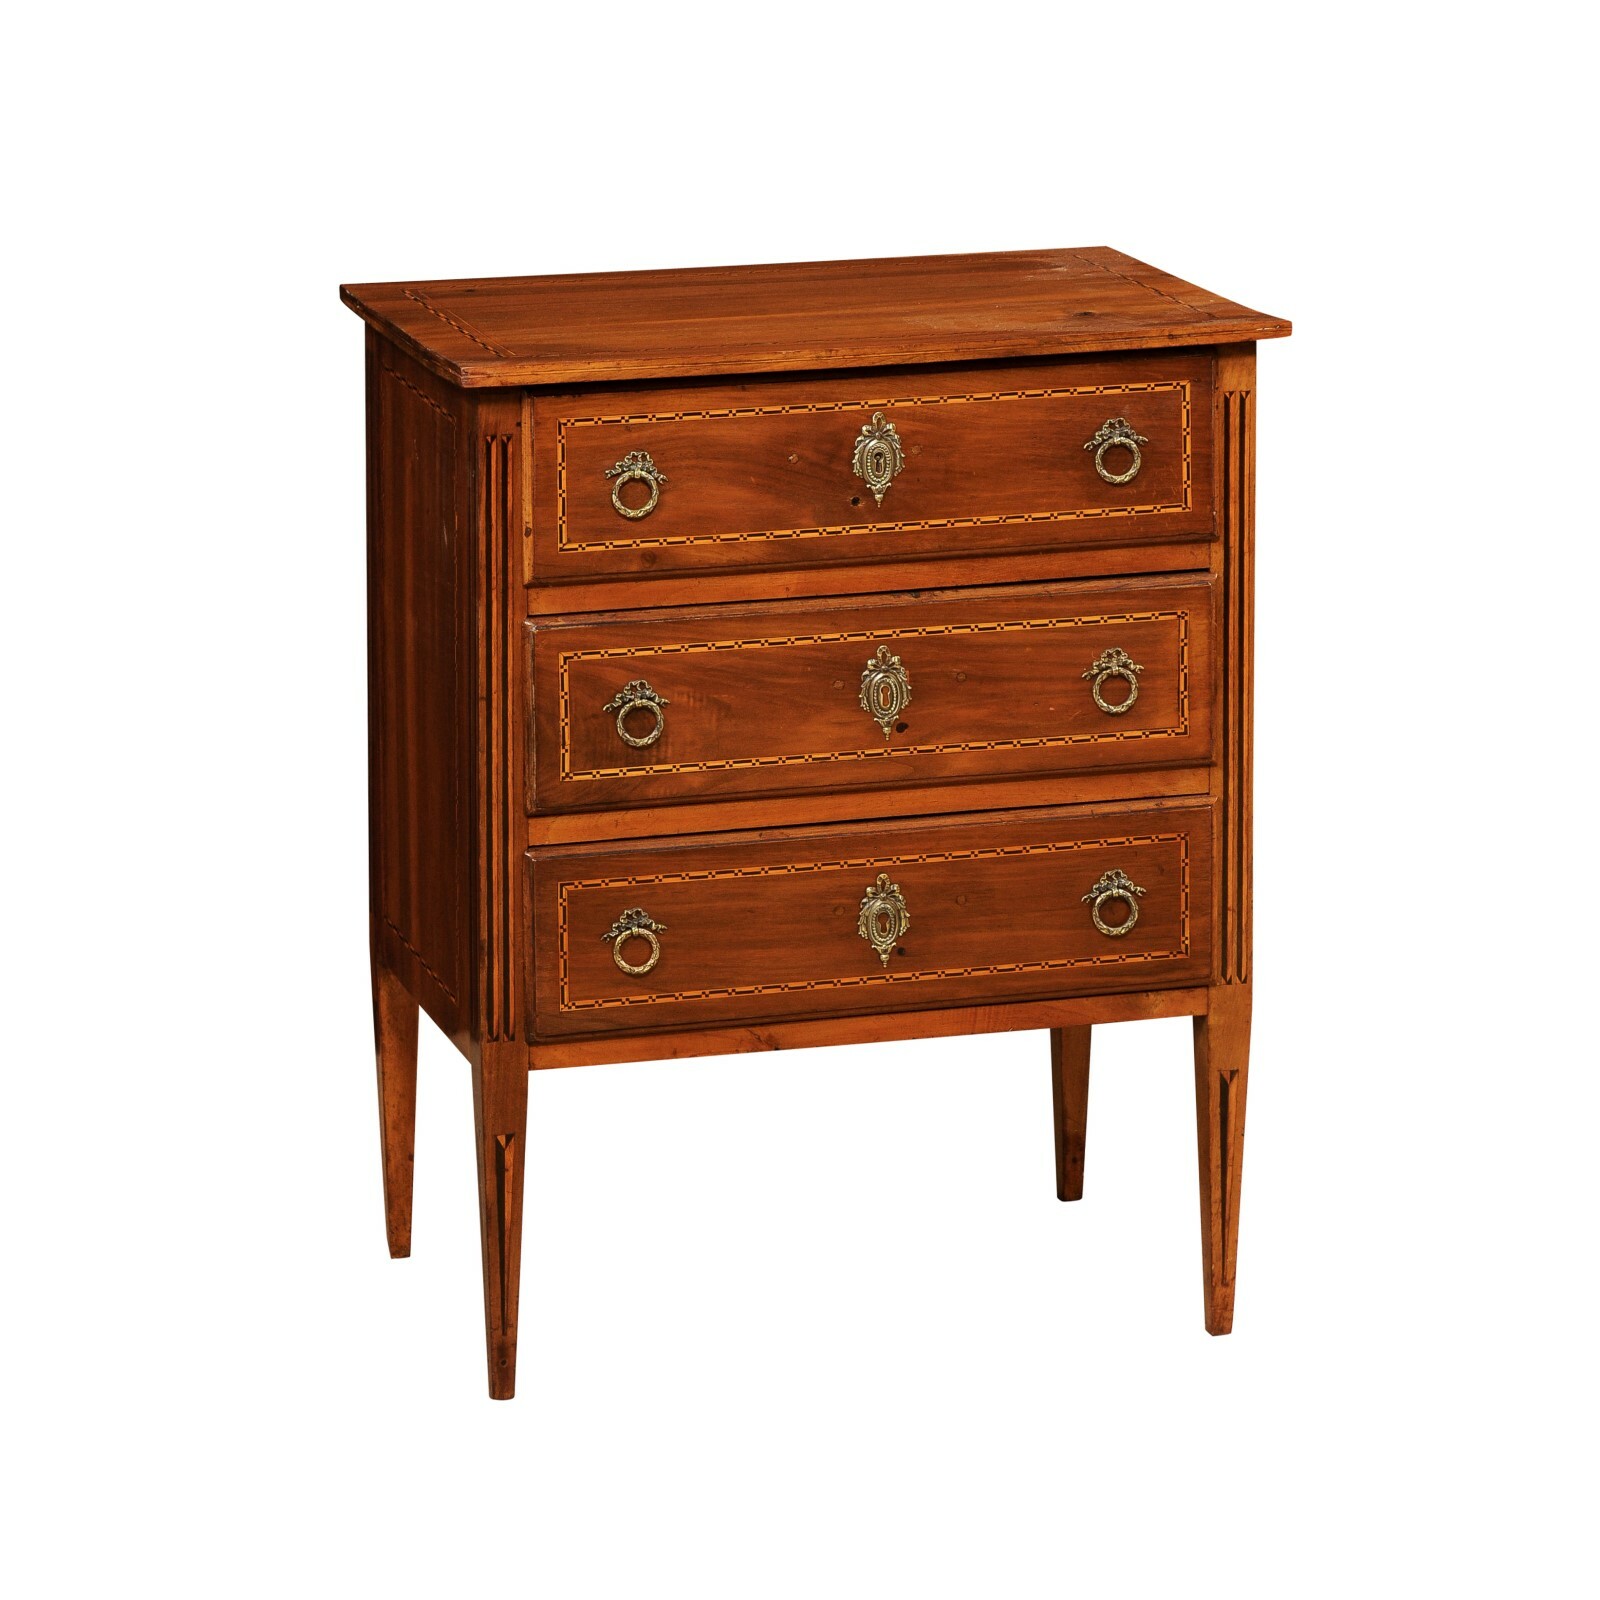 Italian Neoclassic Style End Chest w/Inlays